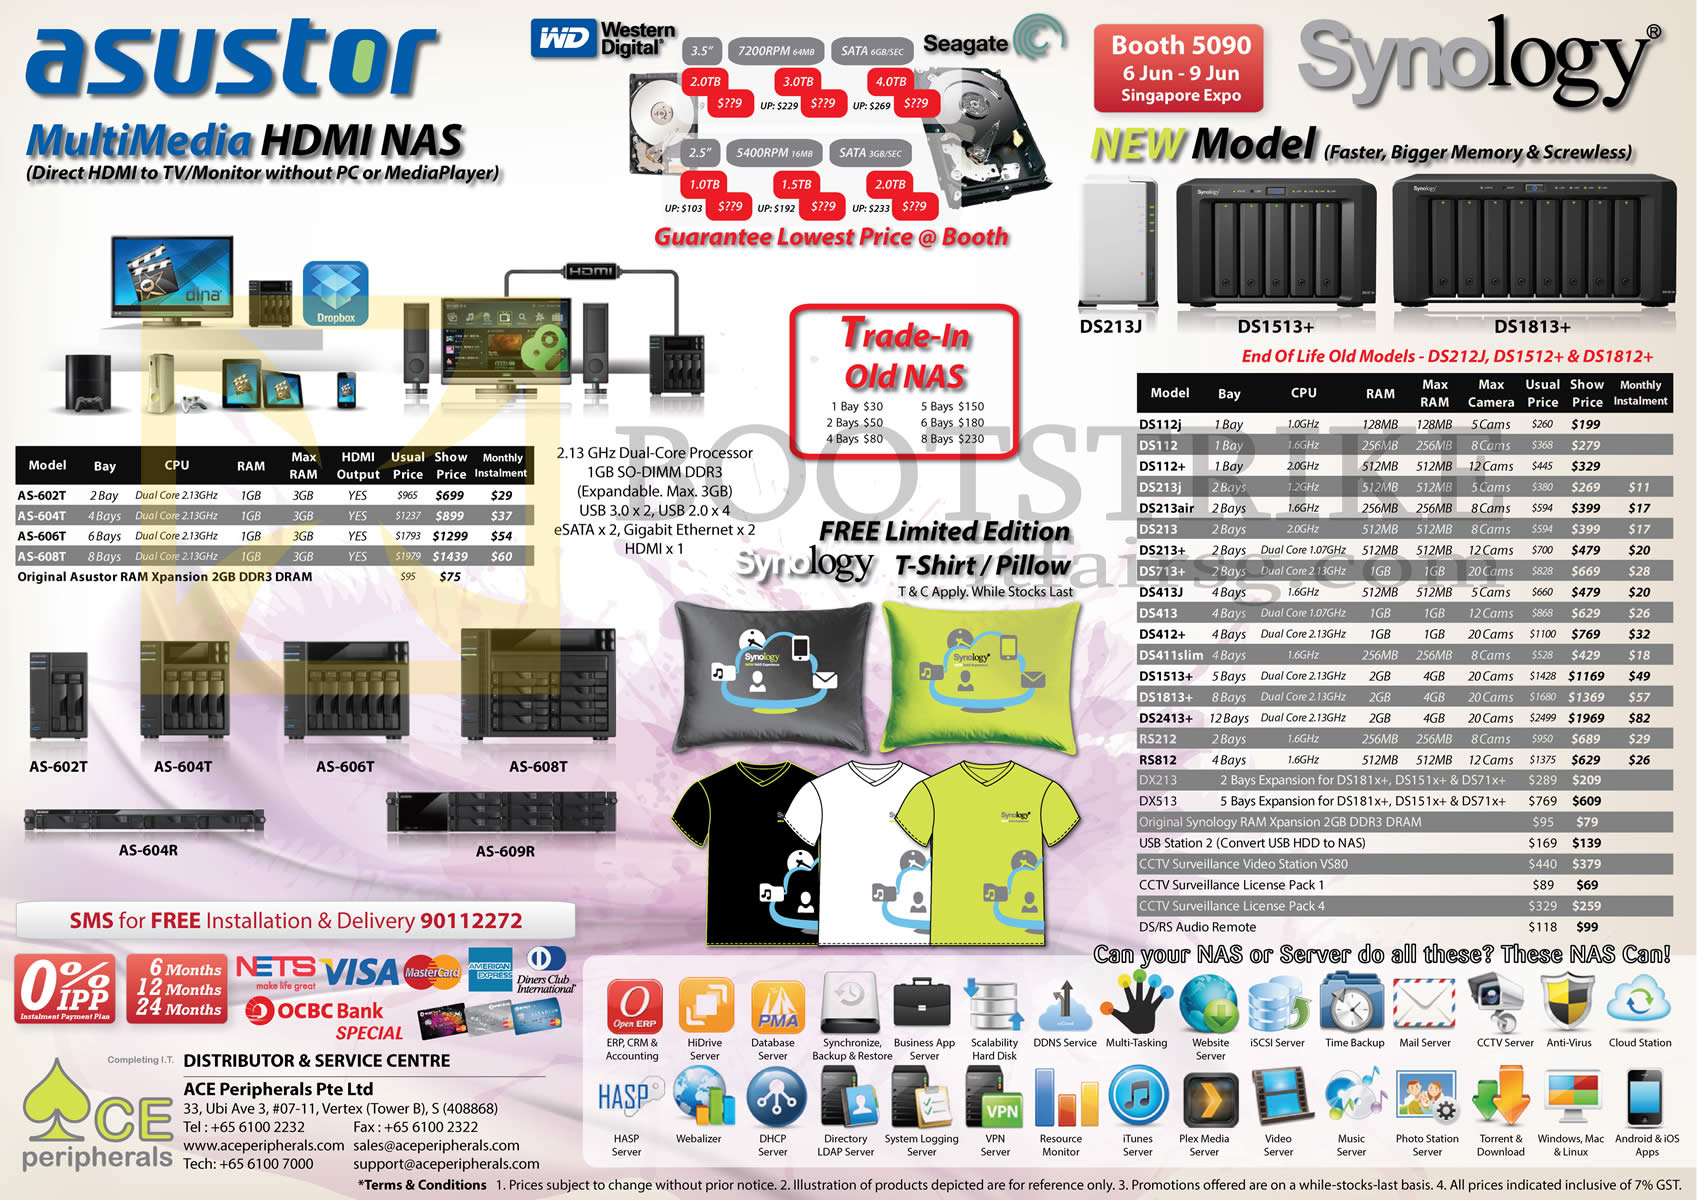 PC SHOW 2013 price list image brochure of Ace Peripherals Asustor Synology NAS, Seagate HardDisk WD 2.5 3.5 2TB 3TB 4TB HDD